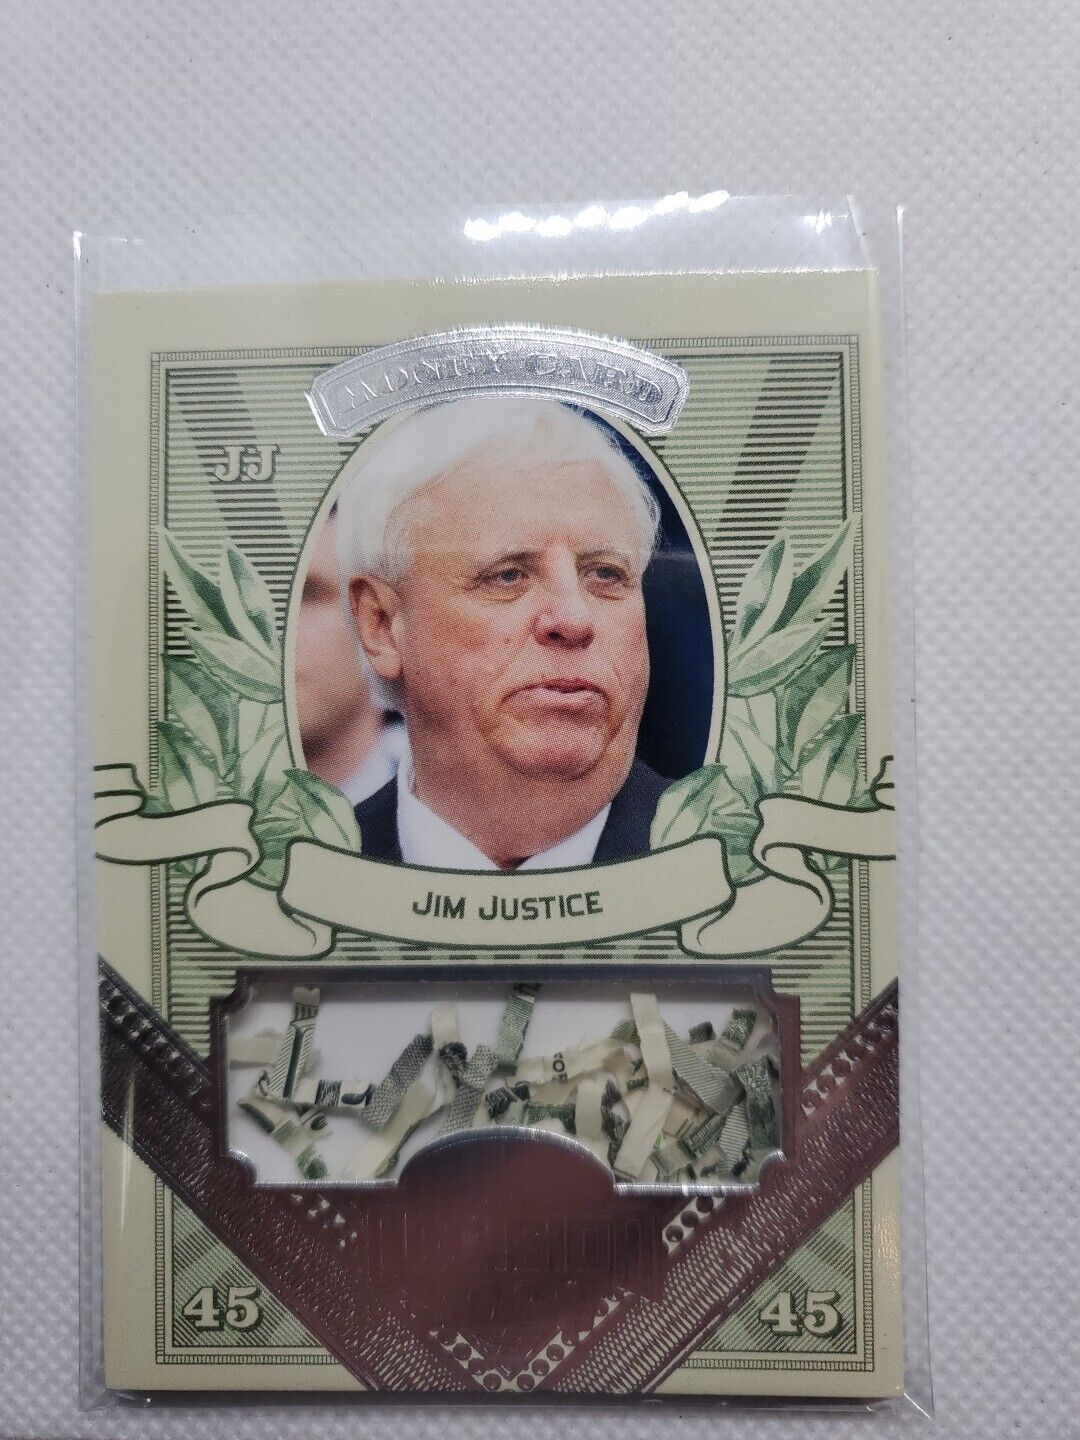 Jim Justice DECISION 2020 SERIES 1 LIMITED EDITION MONEY CARD West Virginia